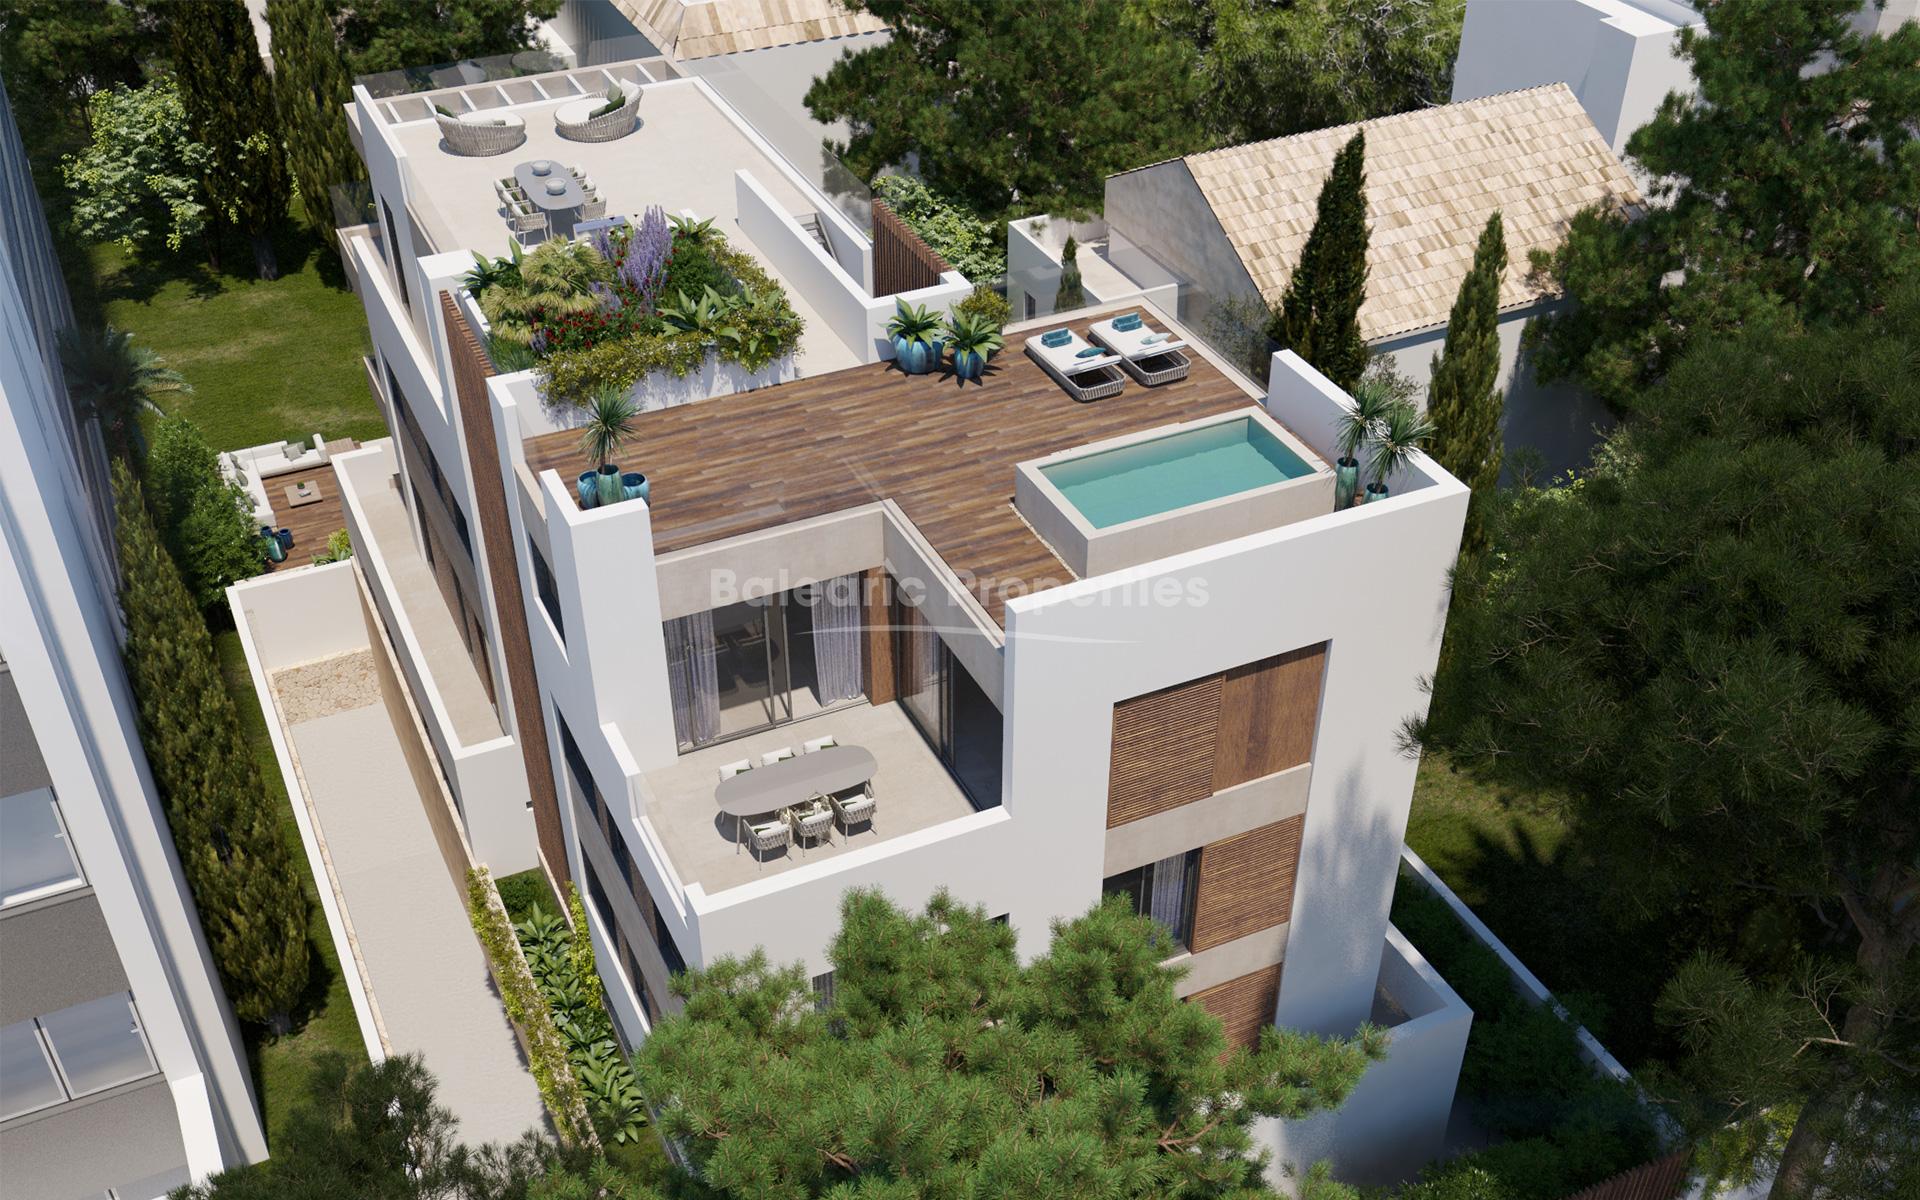 Apartment development with community pool, for sale in Palma, Mallorca